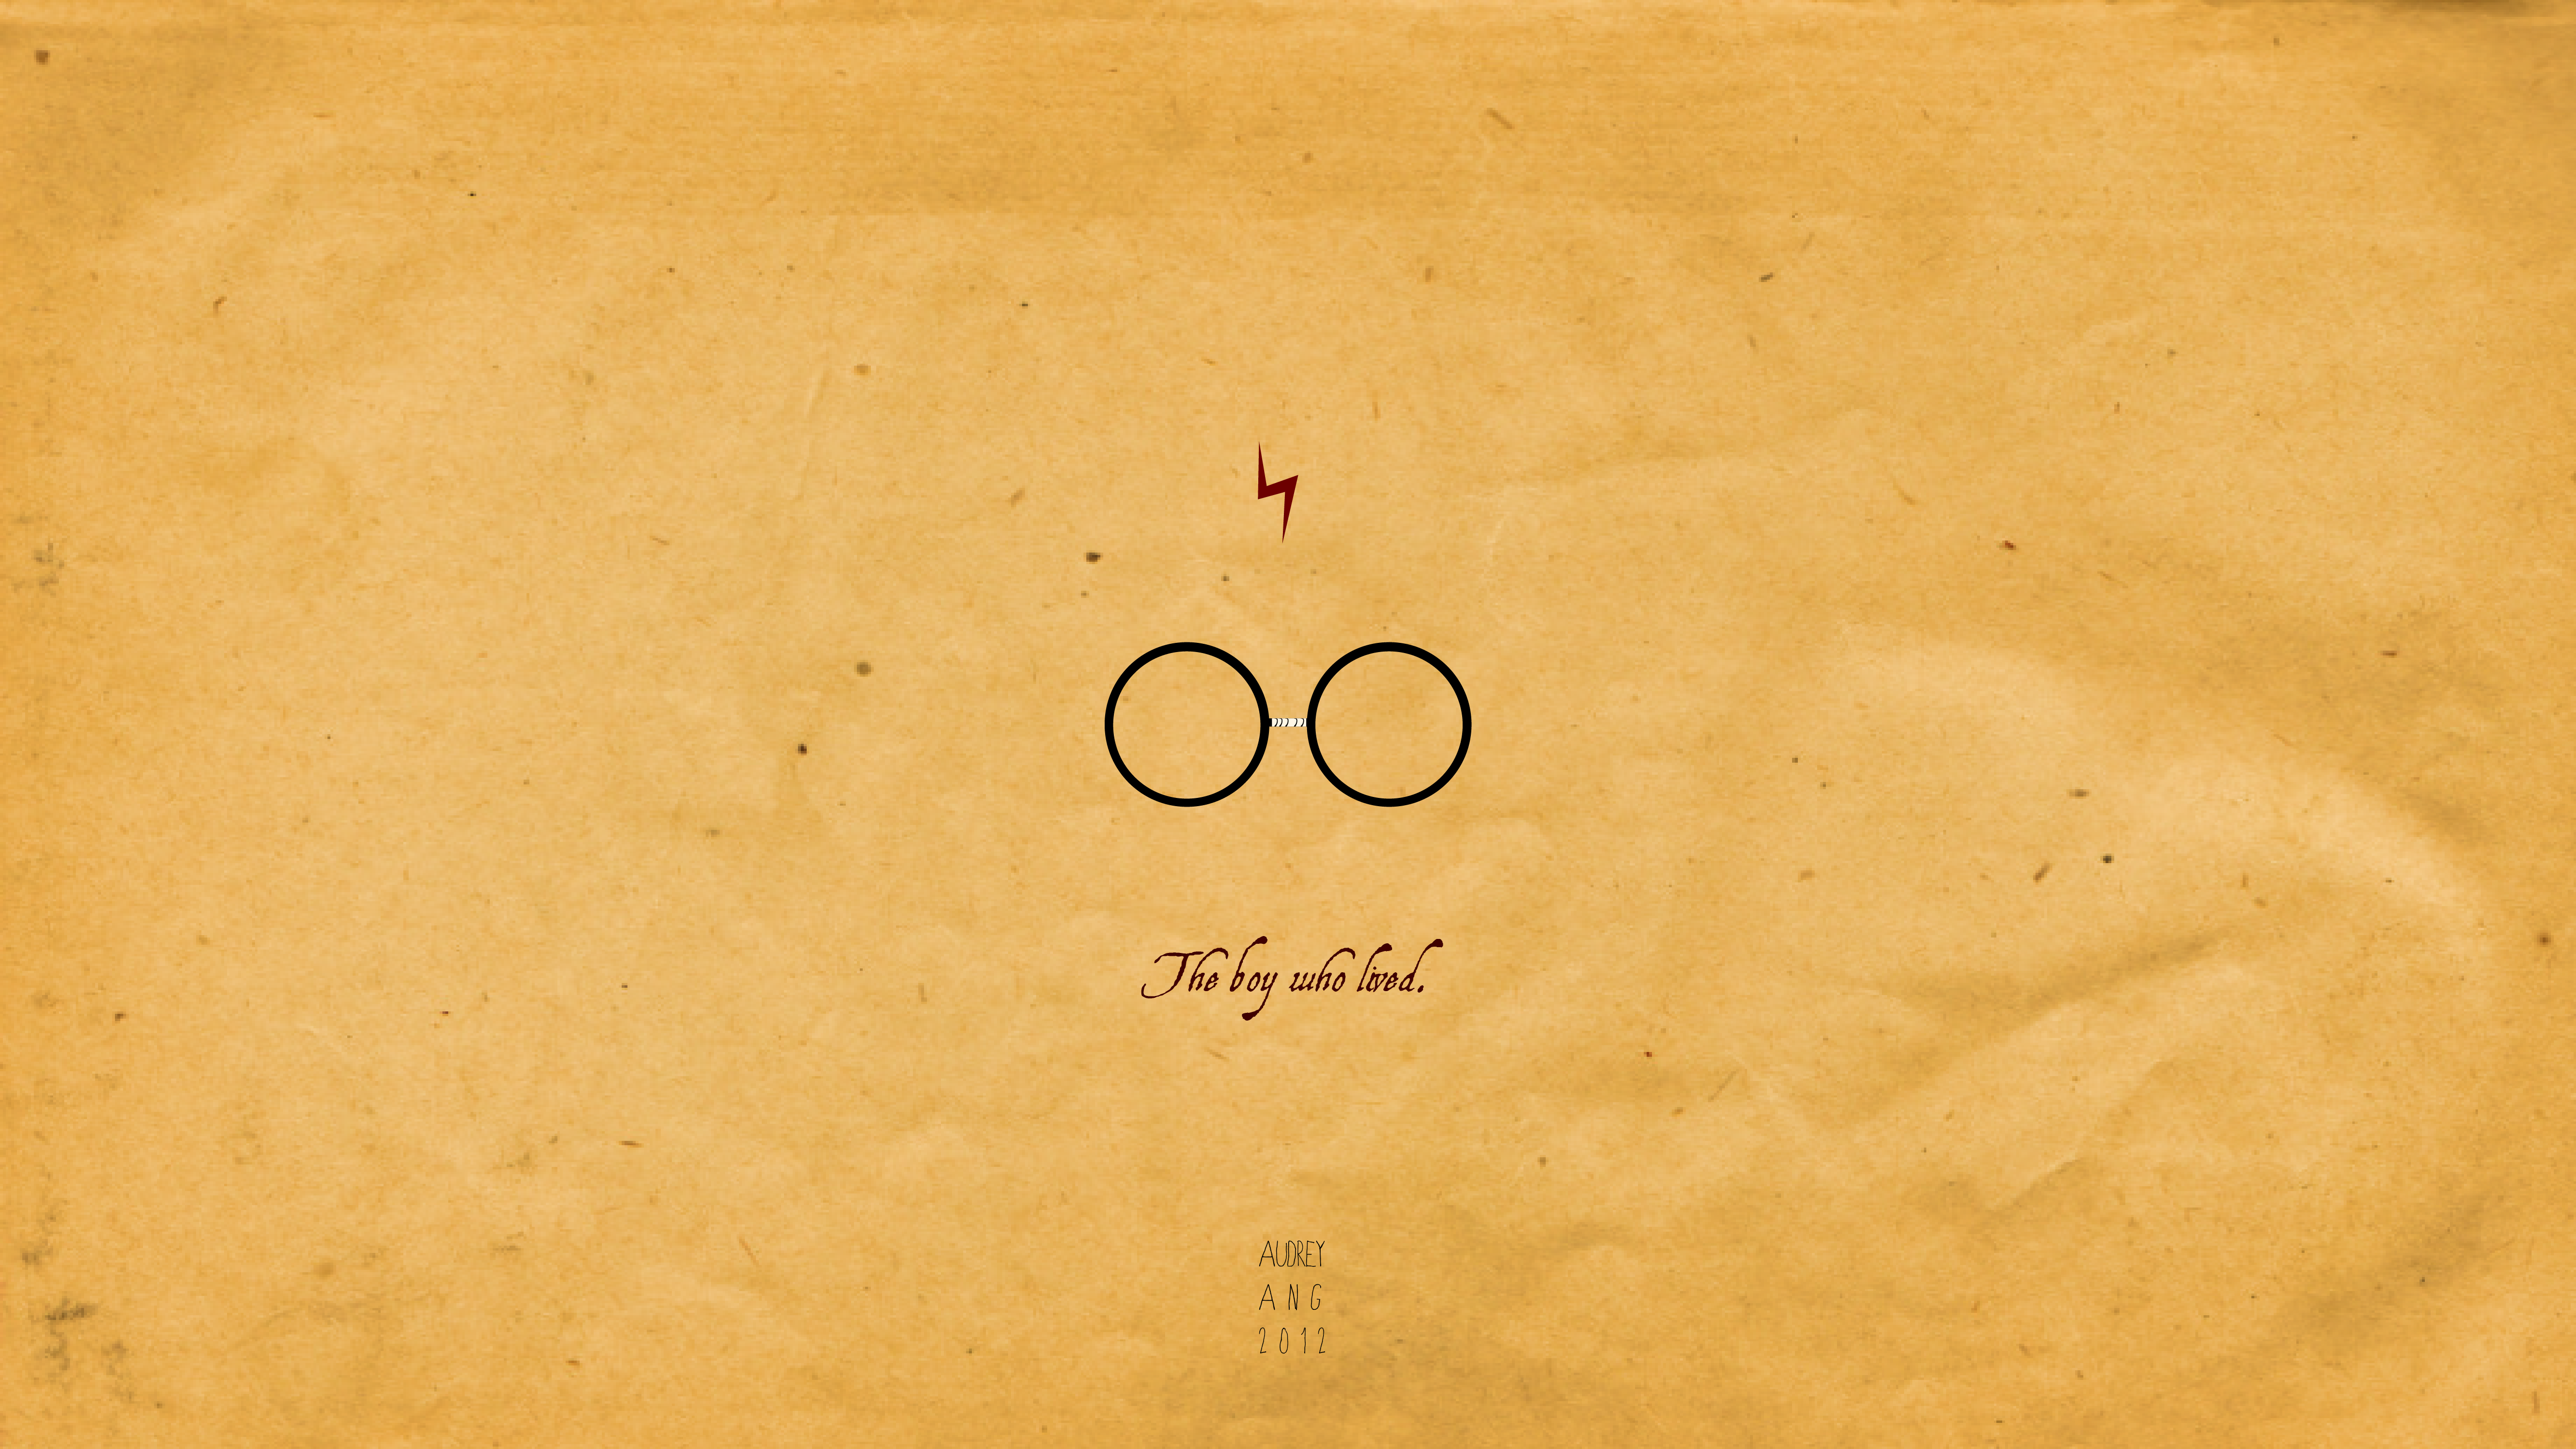 Harry Potter Wallpaper For iPhone At Movies Monodomo